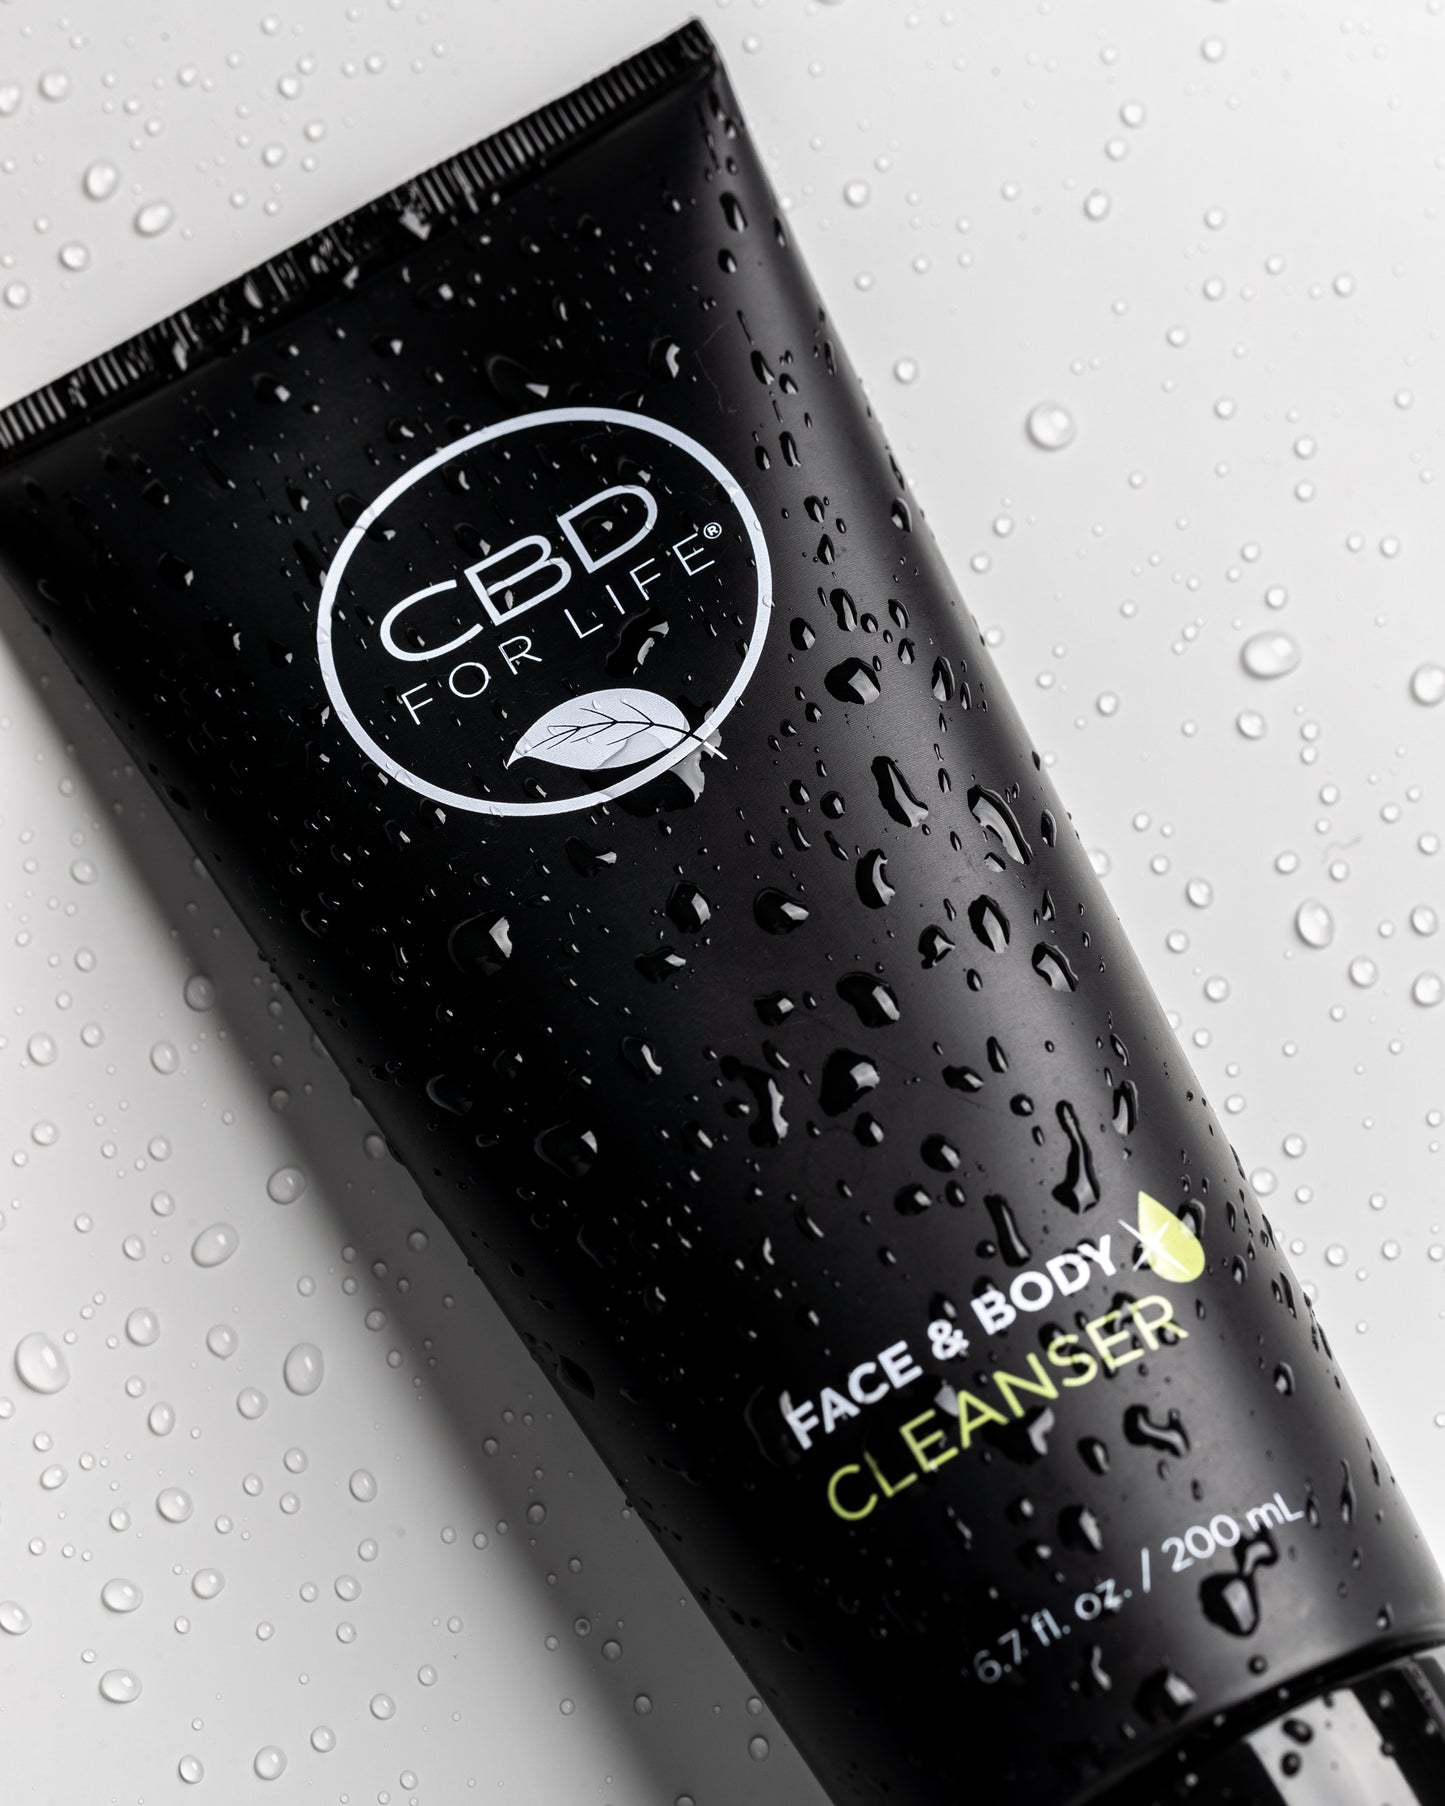 Three reasons to love our CBD Face & Body Cleanser: 1. CBD face wash dissolves dirt, oil & makeup 2. CBD body wash delivers the most hydrating cleanse 3. Pores are cleared. All in One CBD Face and Body Cleanser